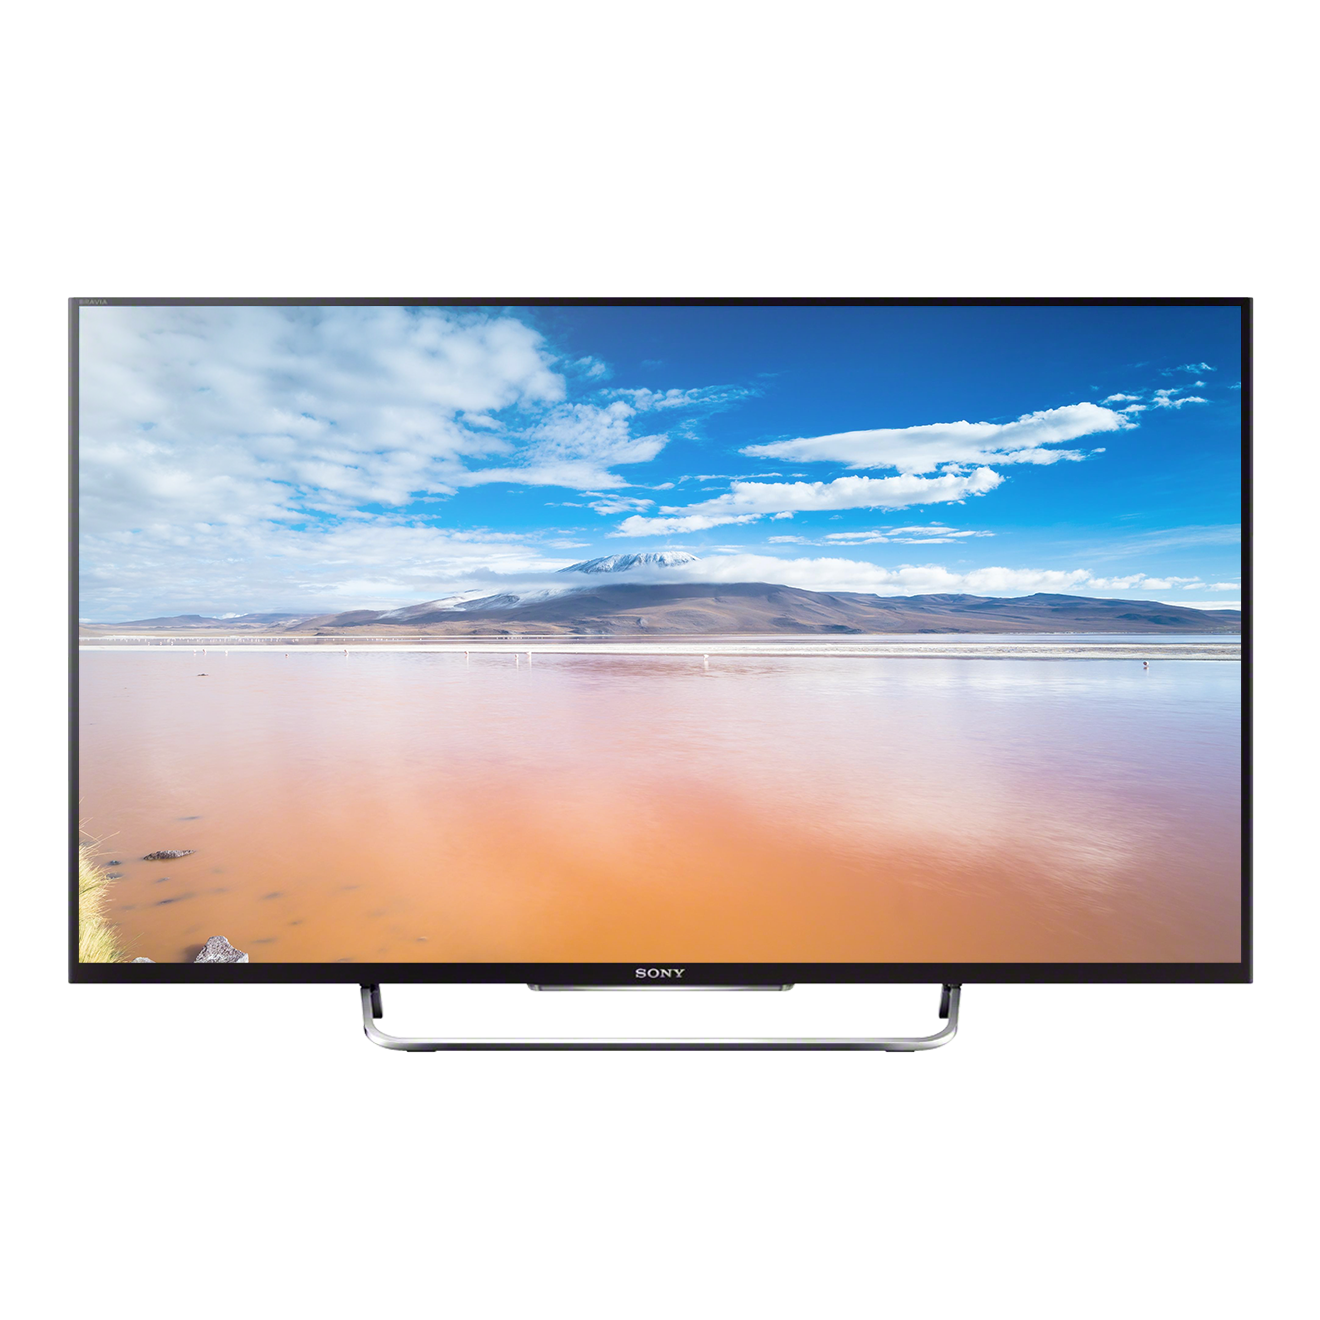 W7 LED TV with Full HD Display 